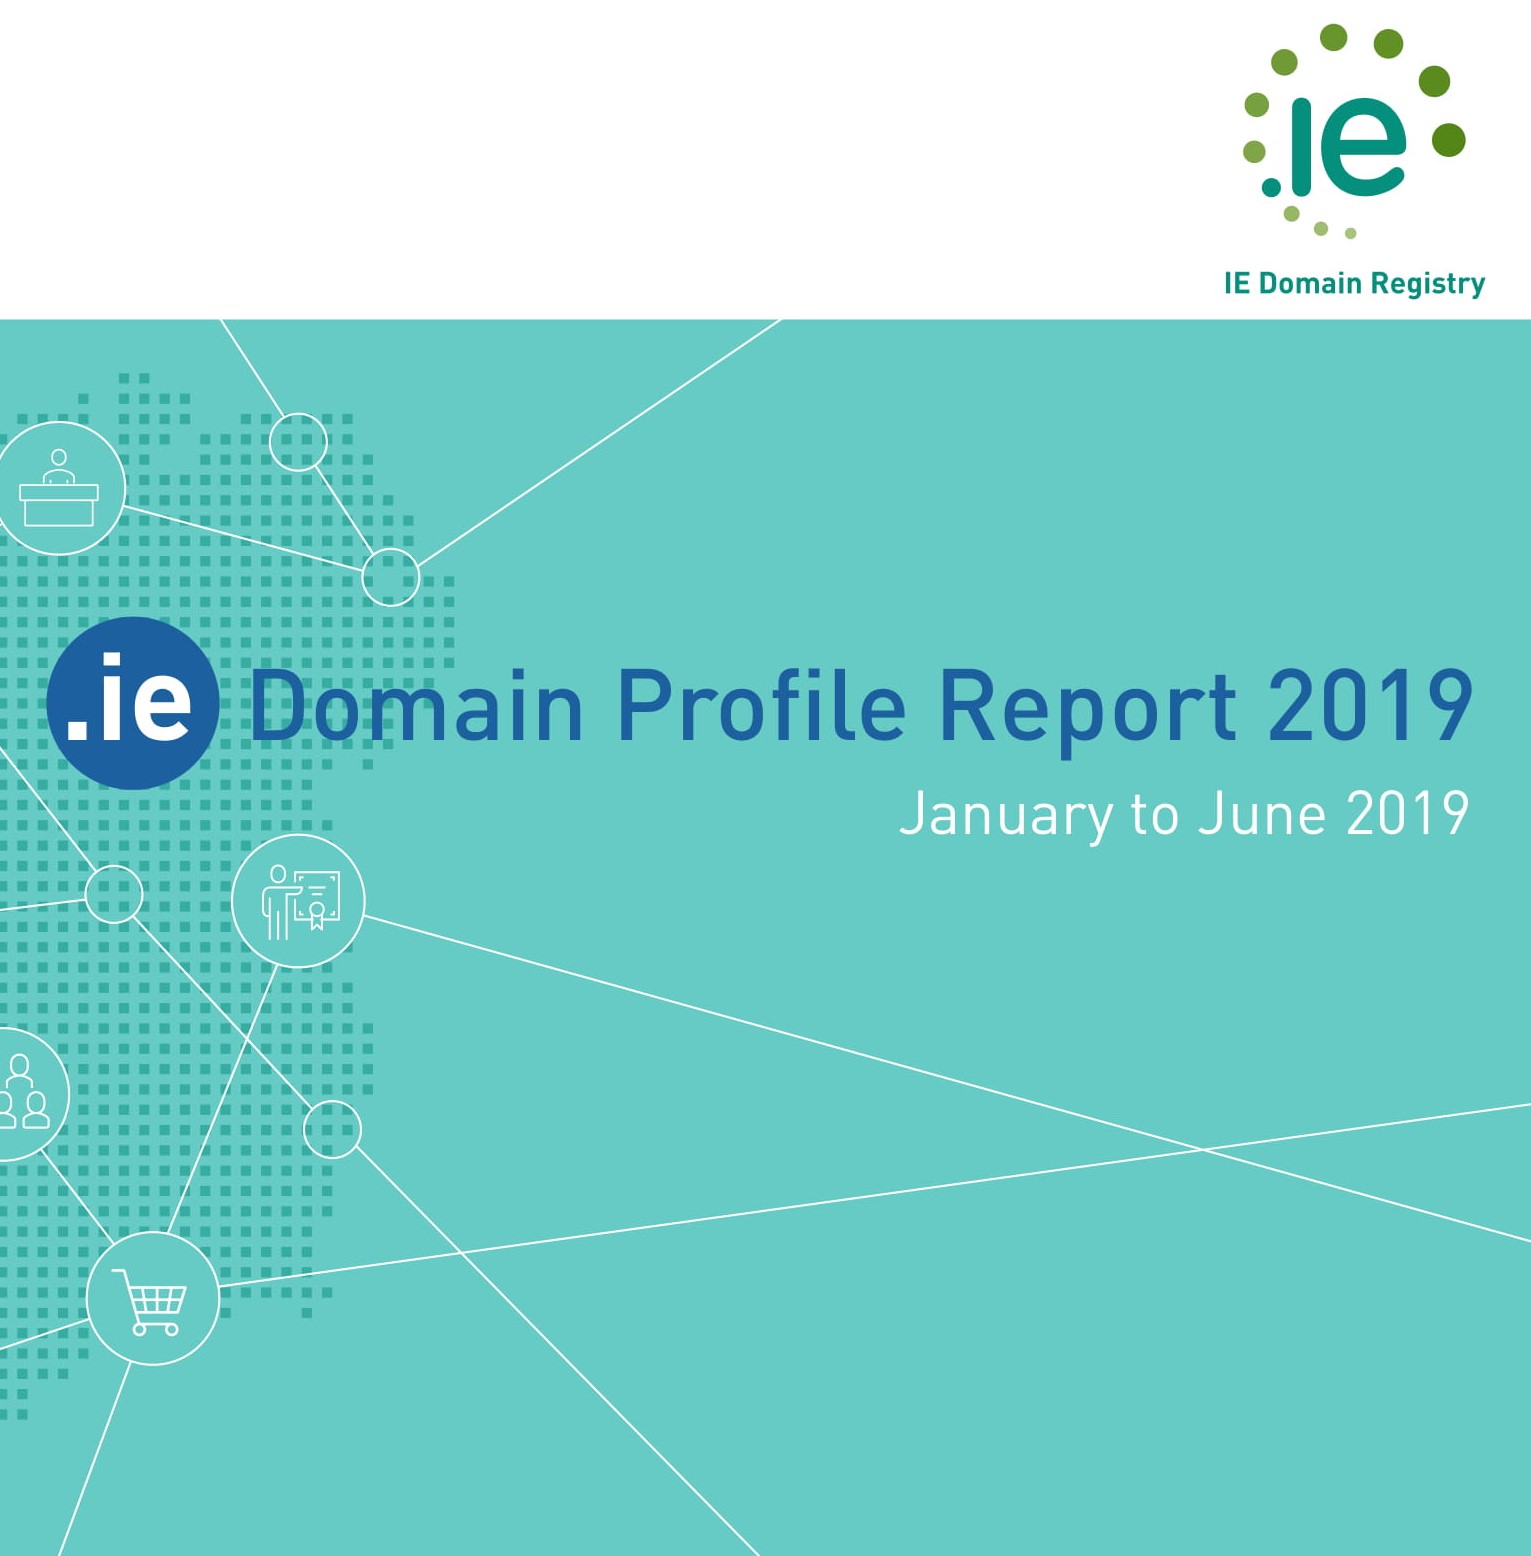 Ireland’s country domain .ie grows 40% in five years, fuelled by registration rule change, a buoyant economy, Brexit and social network limitations